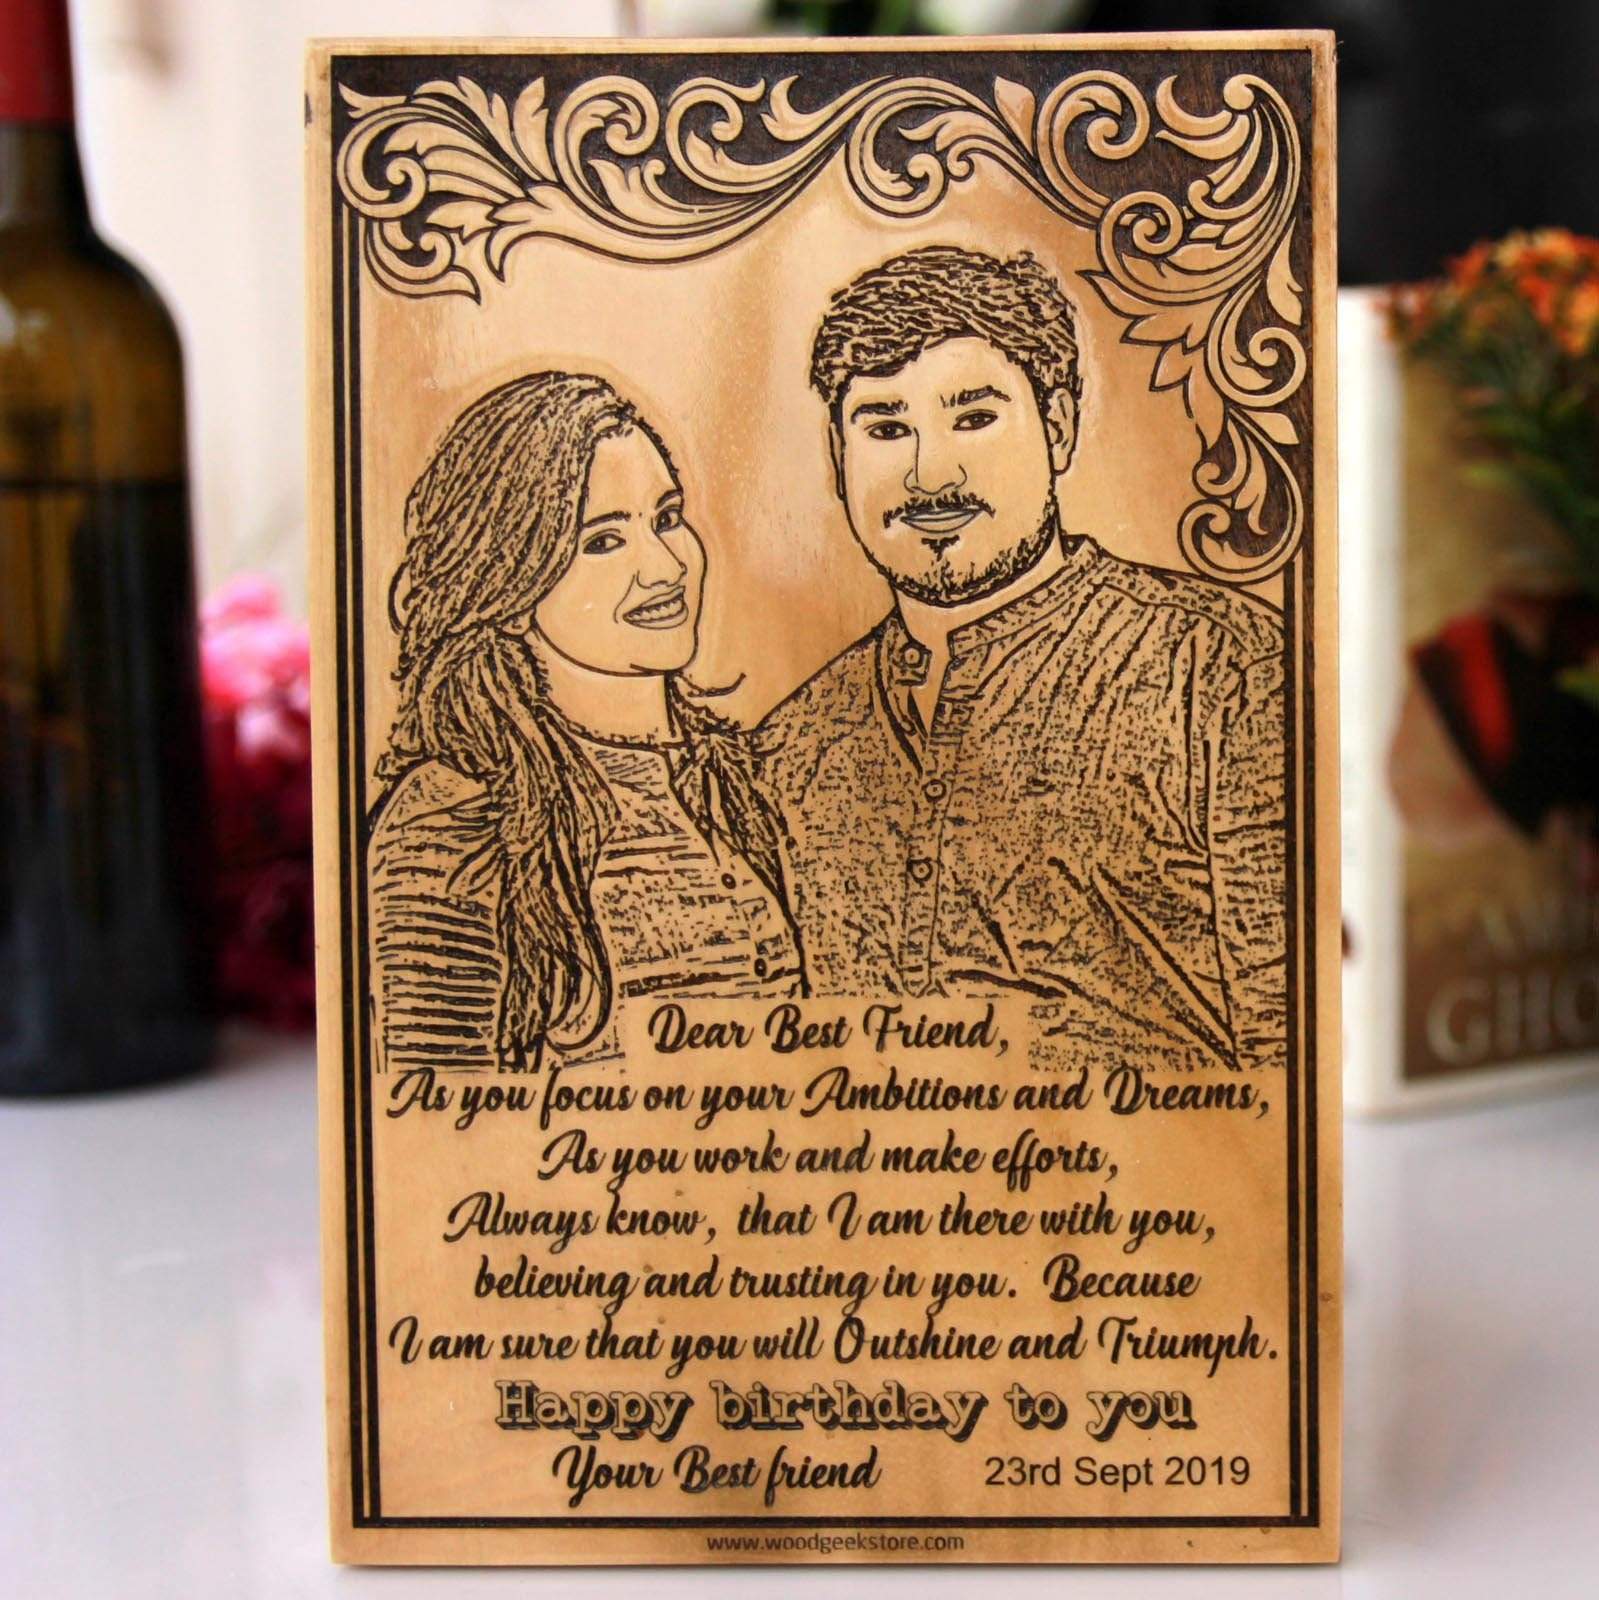 Happy Birthday Best Friend Personalized Wooden Frame. Looking for best friend gifts? This wooden frame engraved with a photo and a personal birthday wishes is one of the best birthday gifts for friends.